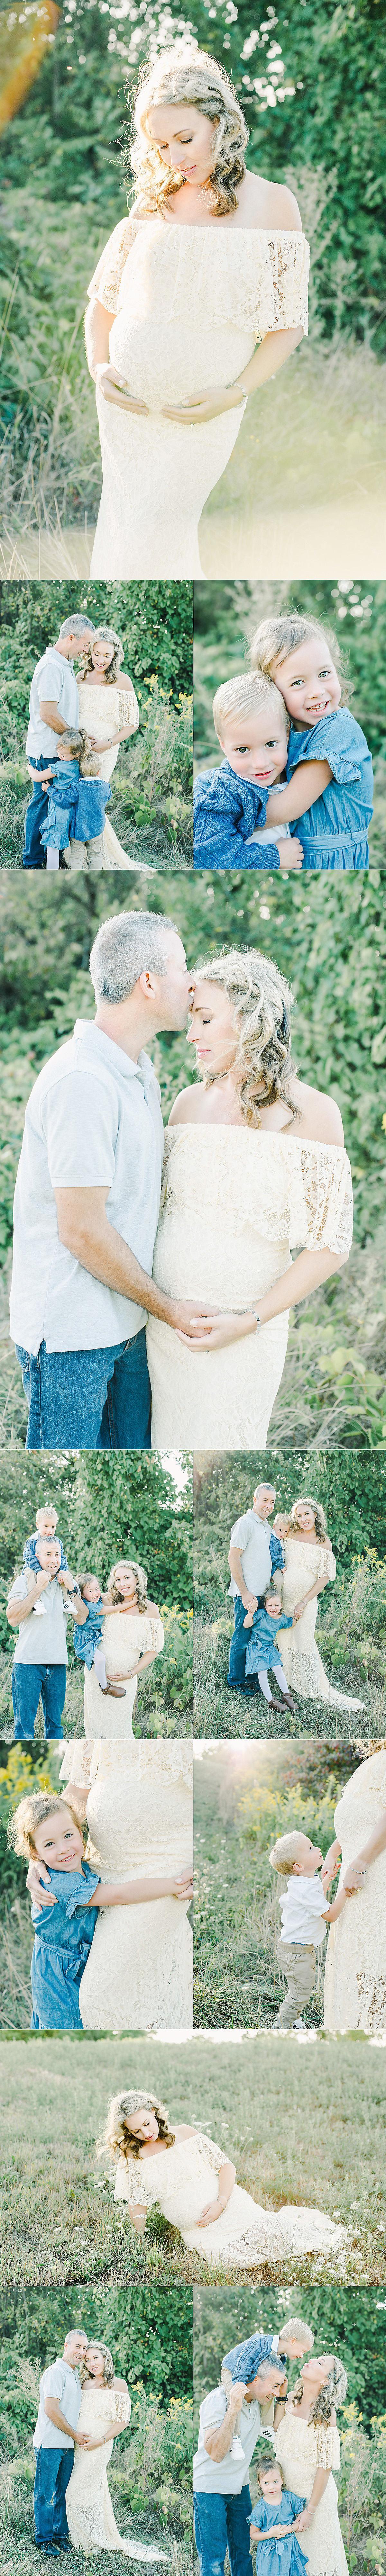 family maternity session in a field